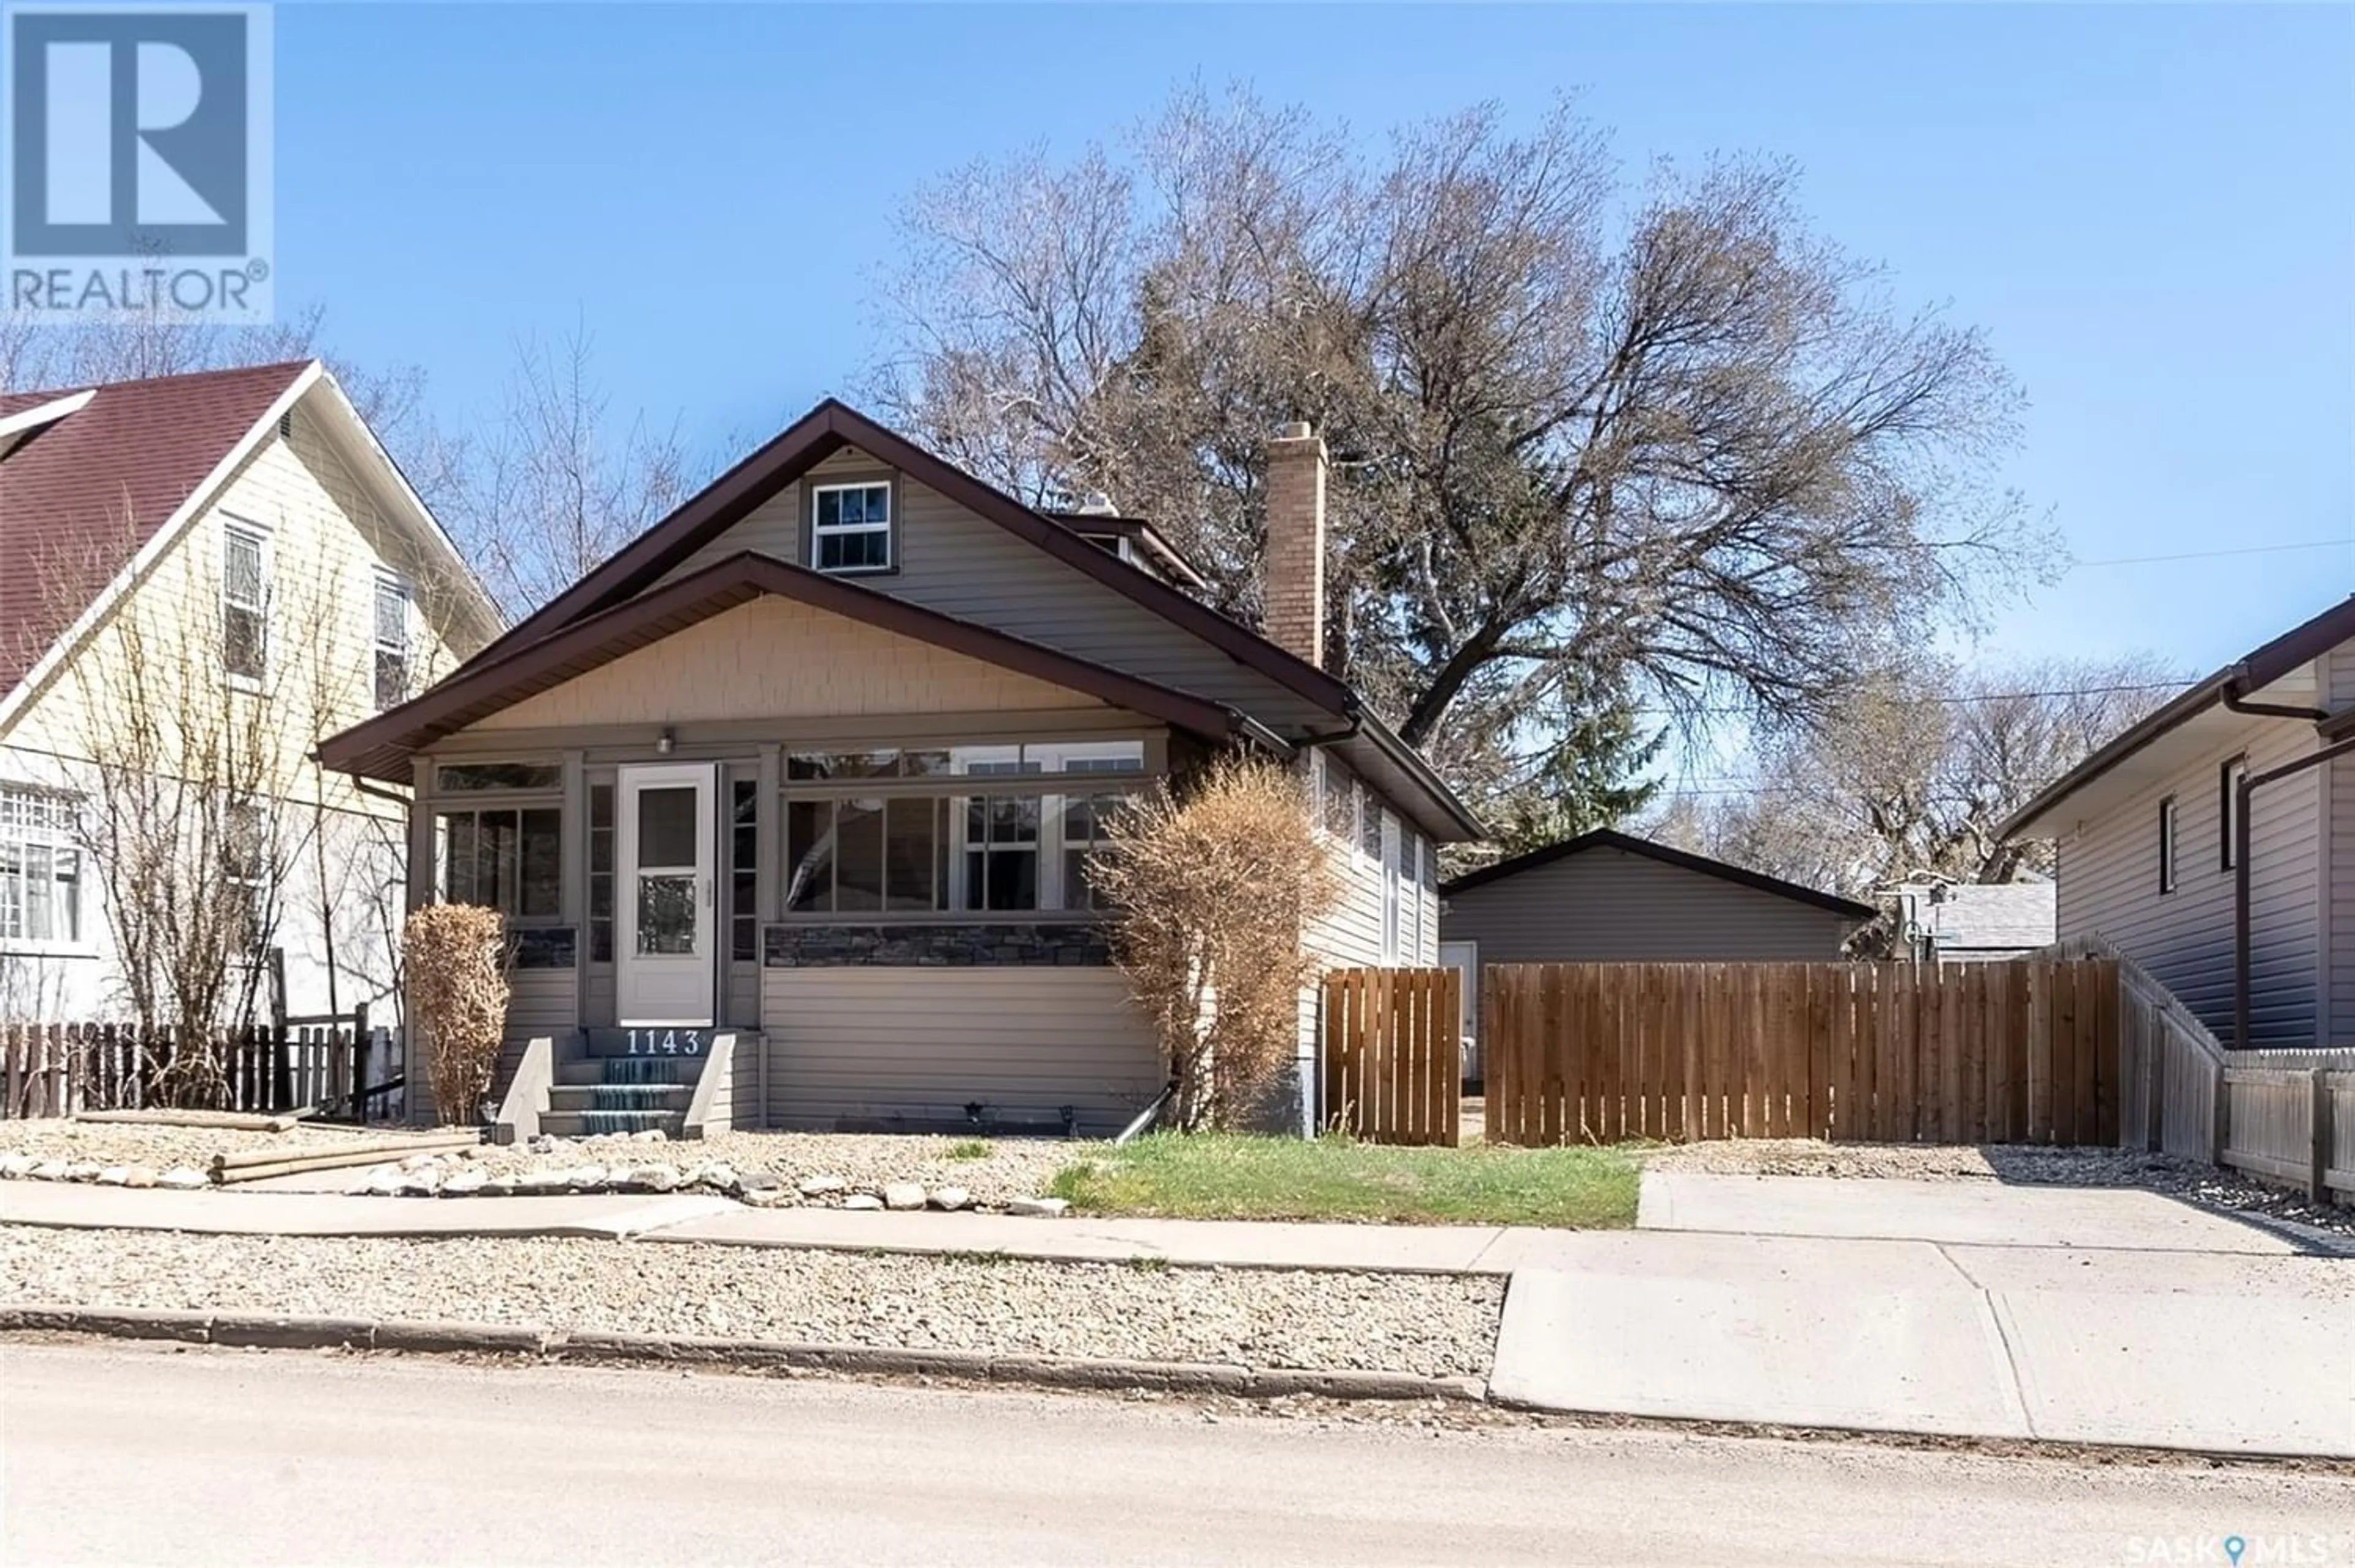 Frontside or backside of a home for 1143 4th AVENUE NW, Moose Jaw Saskatchewan S6H3X3